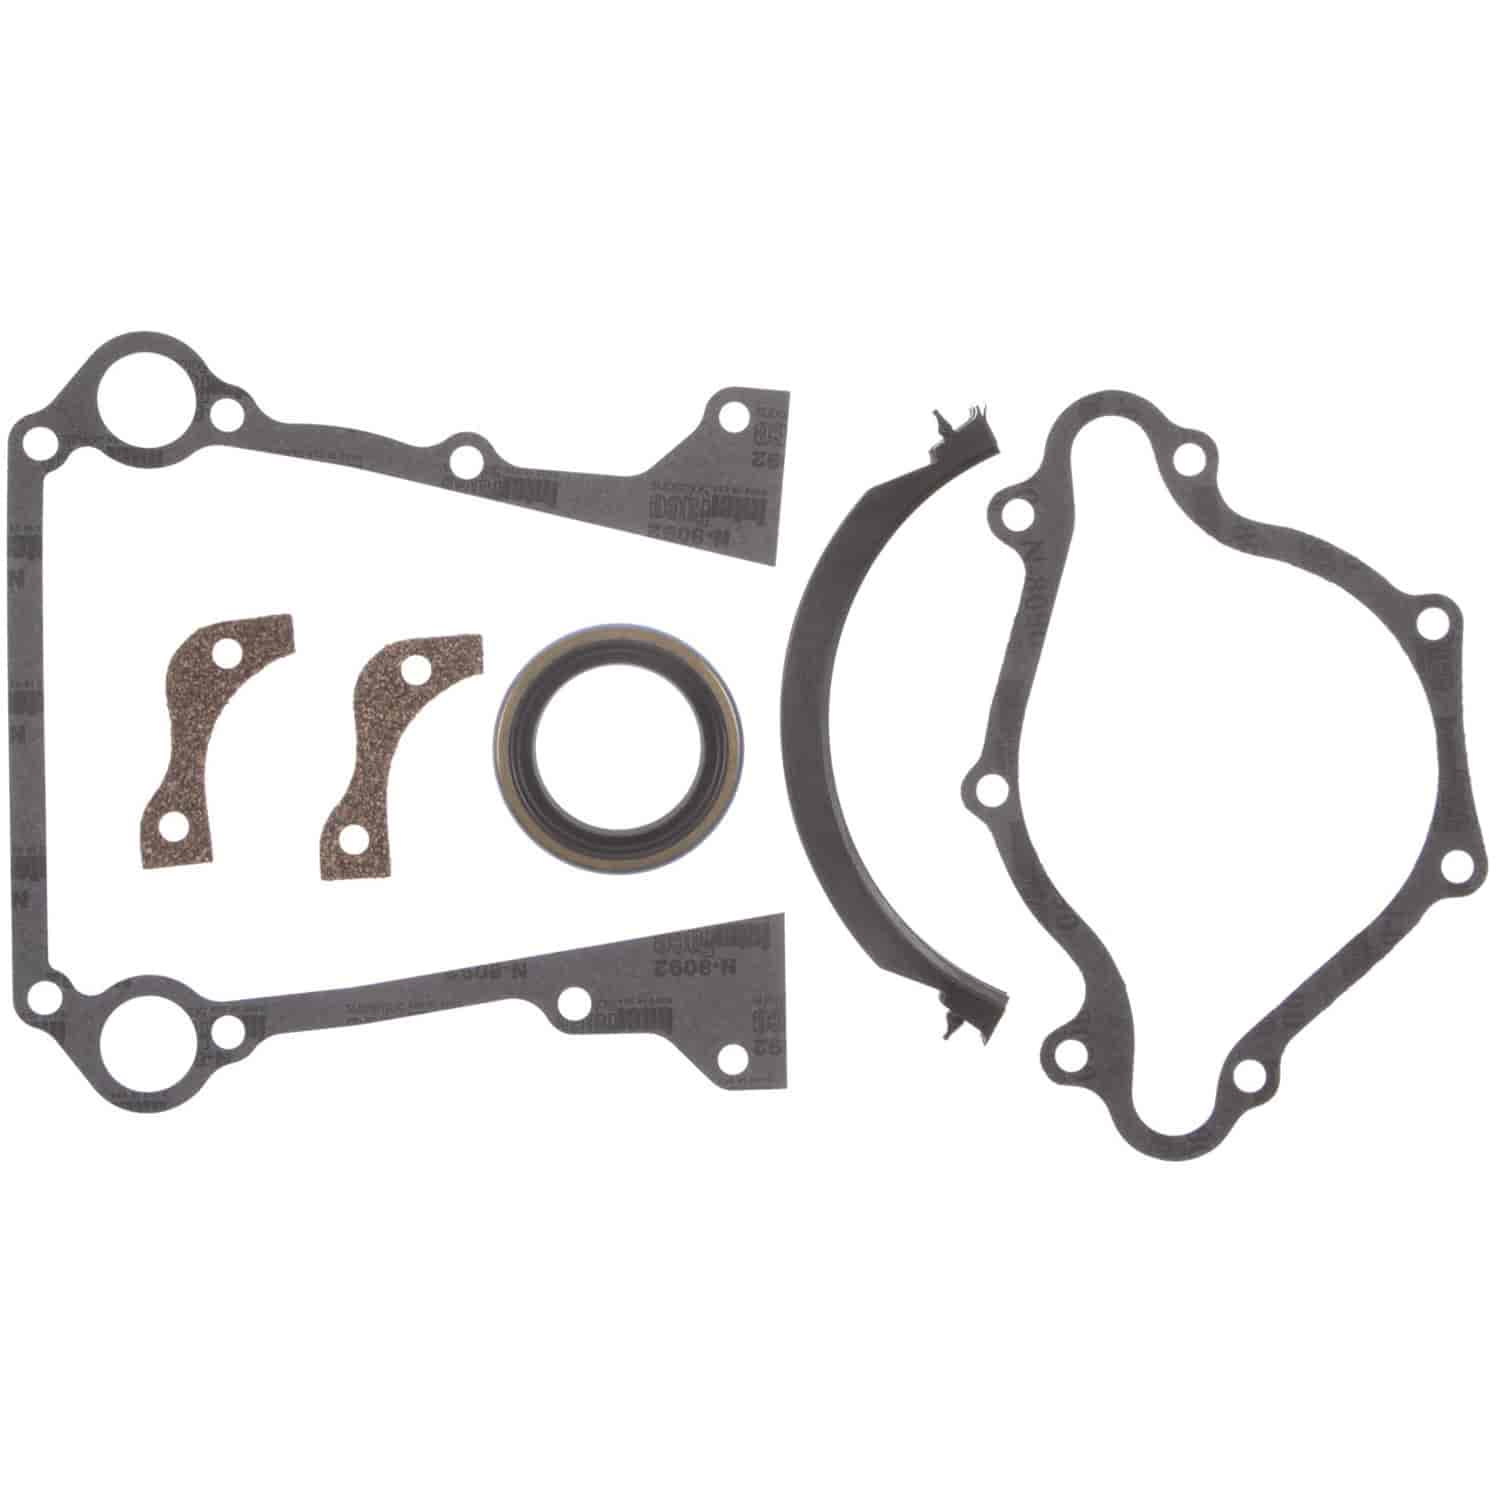 Timing Cover Set Chry-Pass&Ind Dod-Pass&Trk